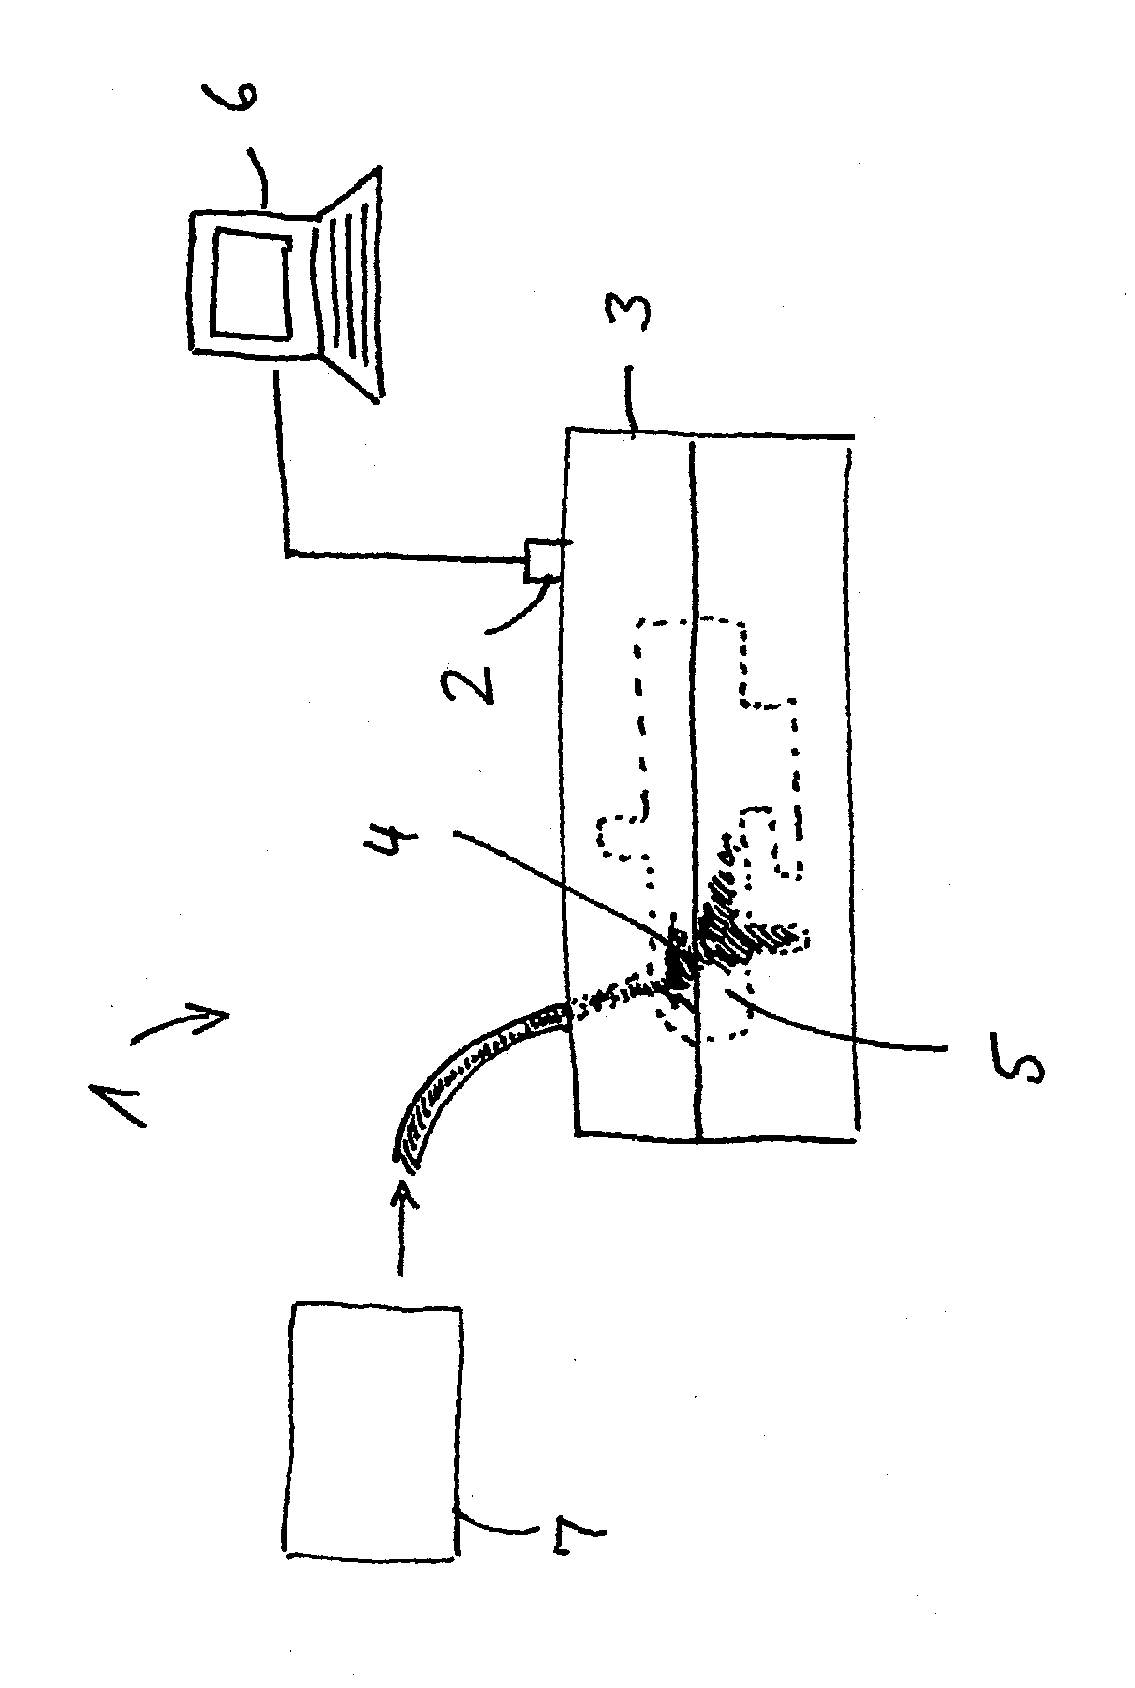 Method and device for monitoring and optimizing injection molding processes